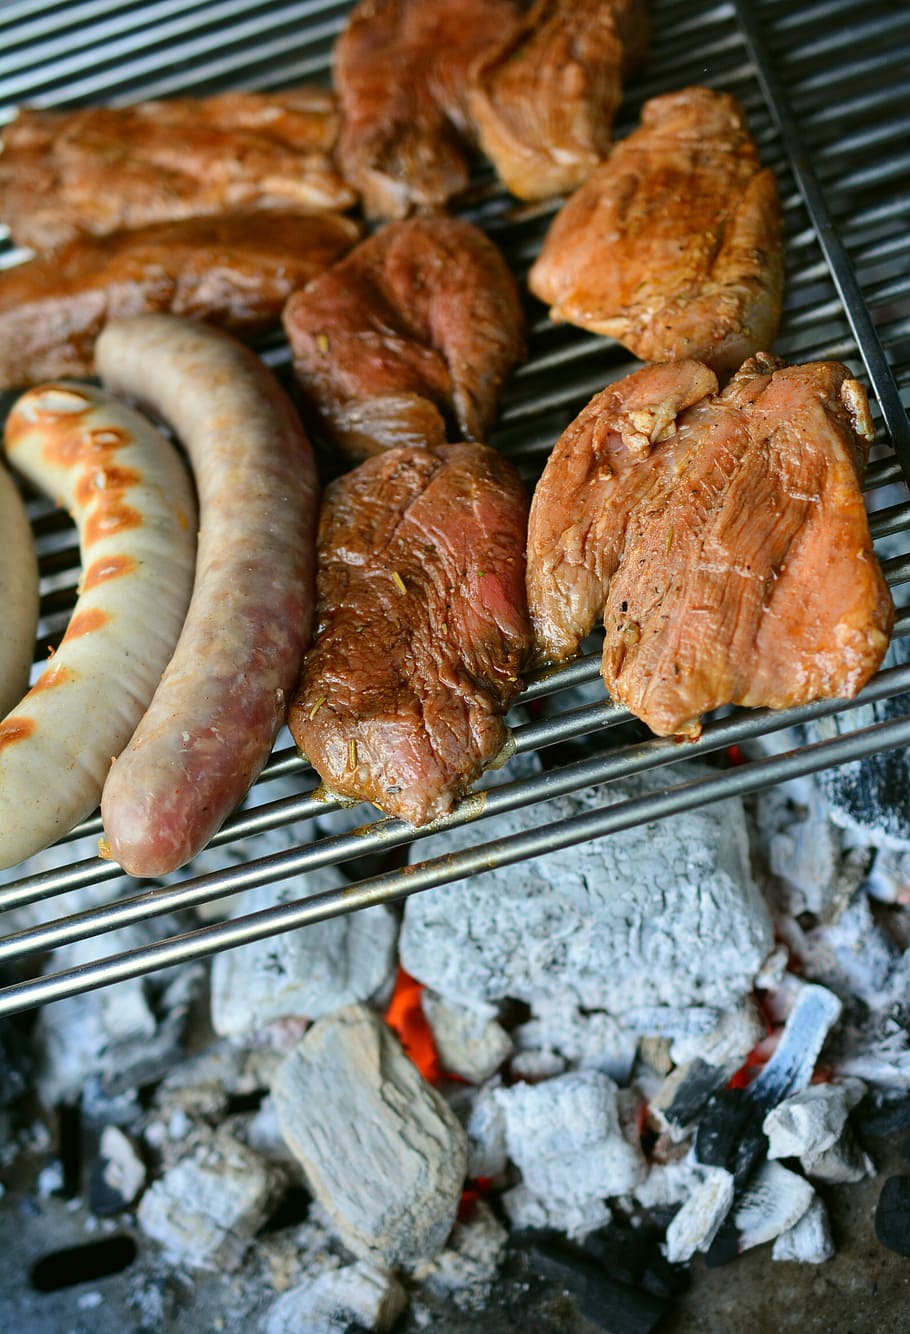 Grilling, Sausage, Meat, Barbecue, sausage meat, grill sausage, sizzle, heat, embers, charcoal